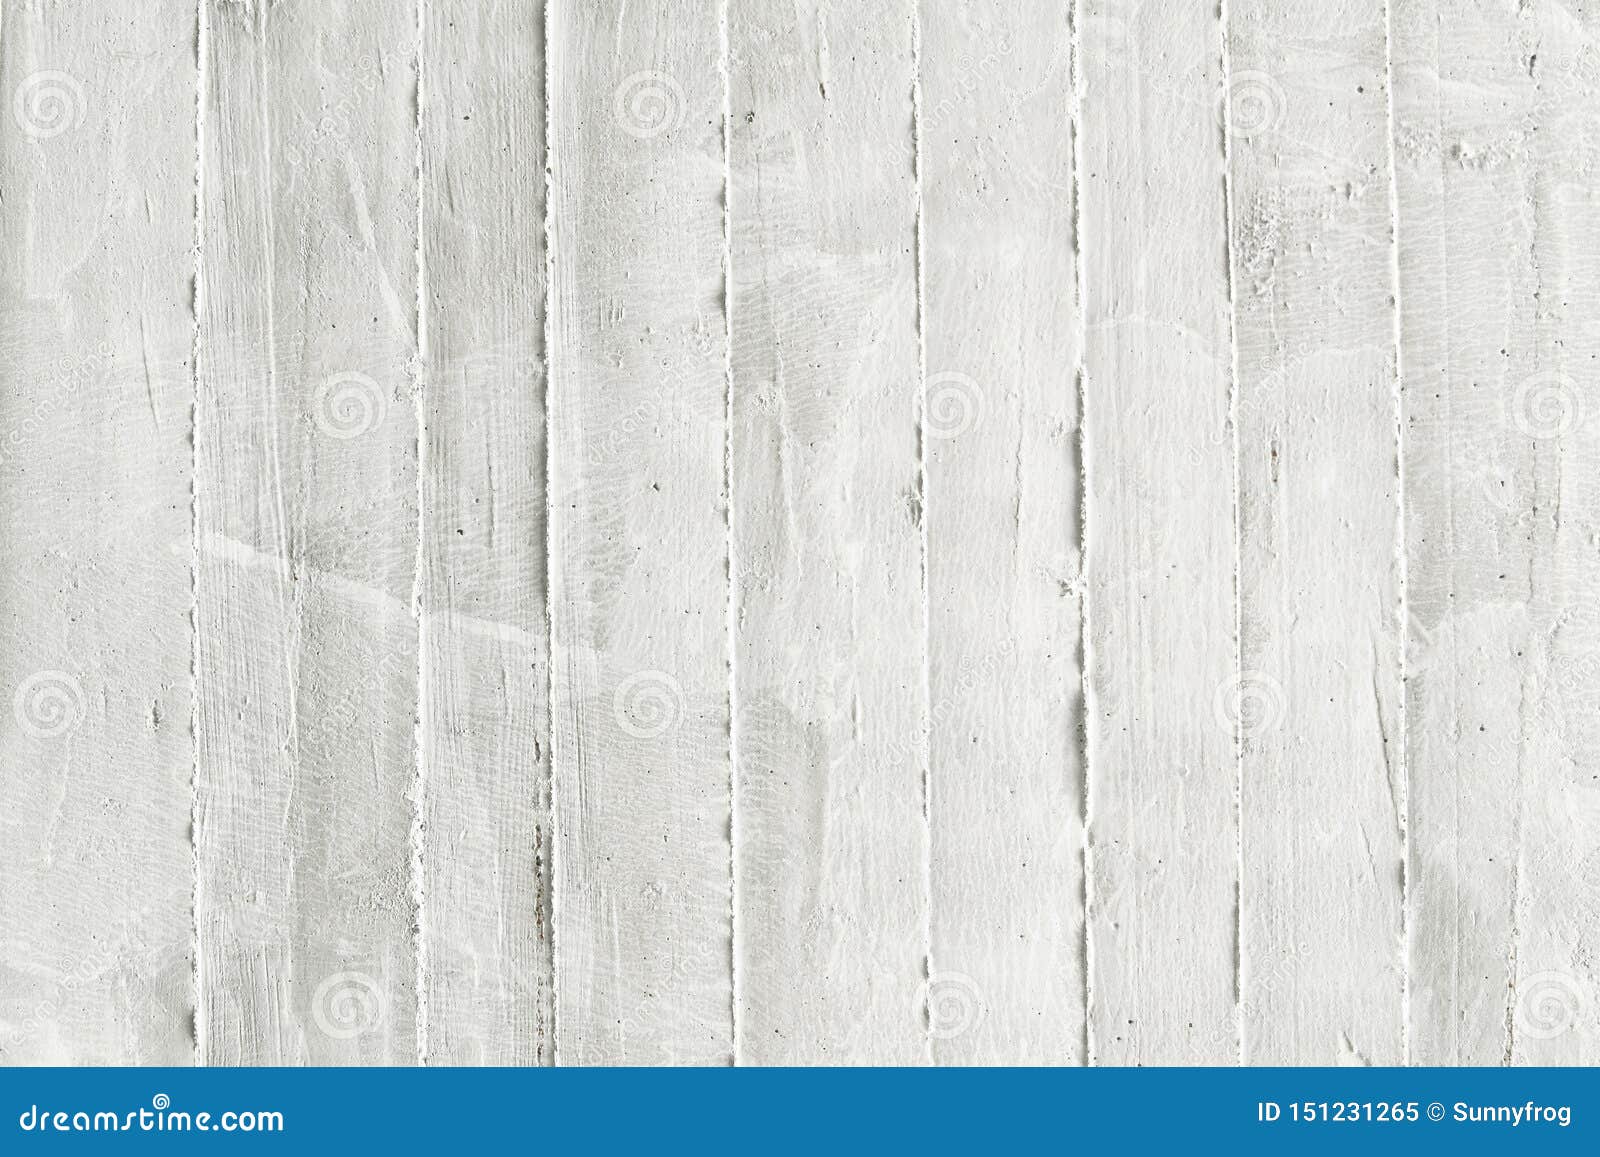 old white grunge textured backgrounds. white wall background